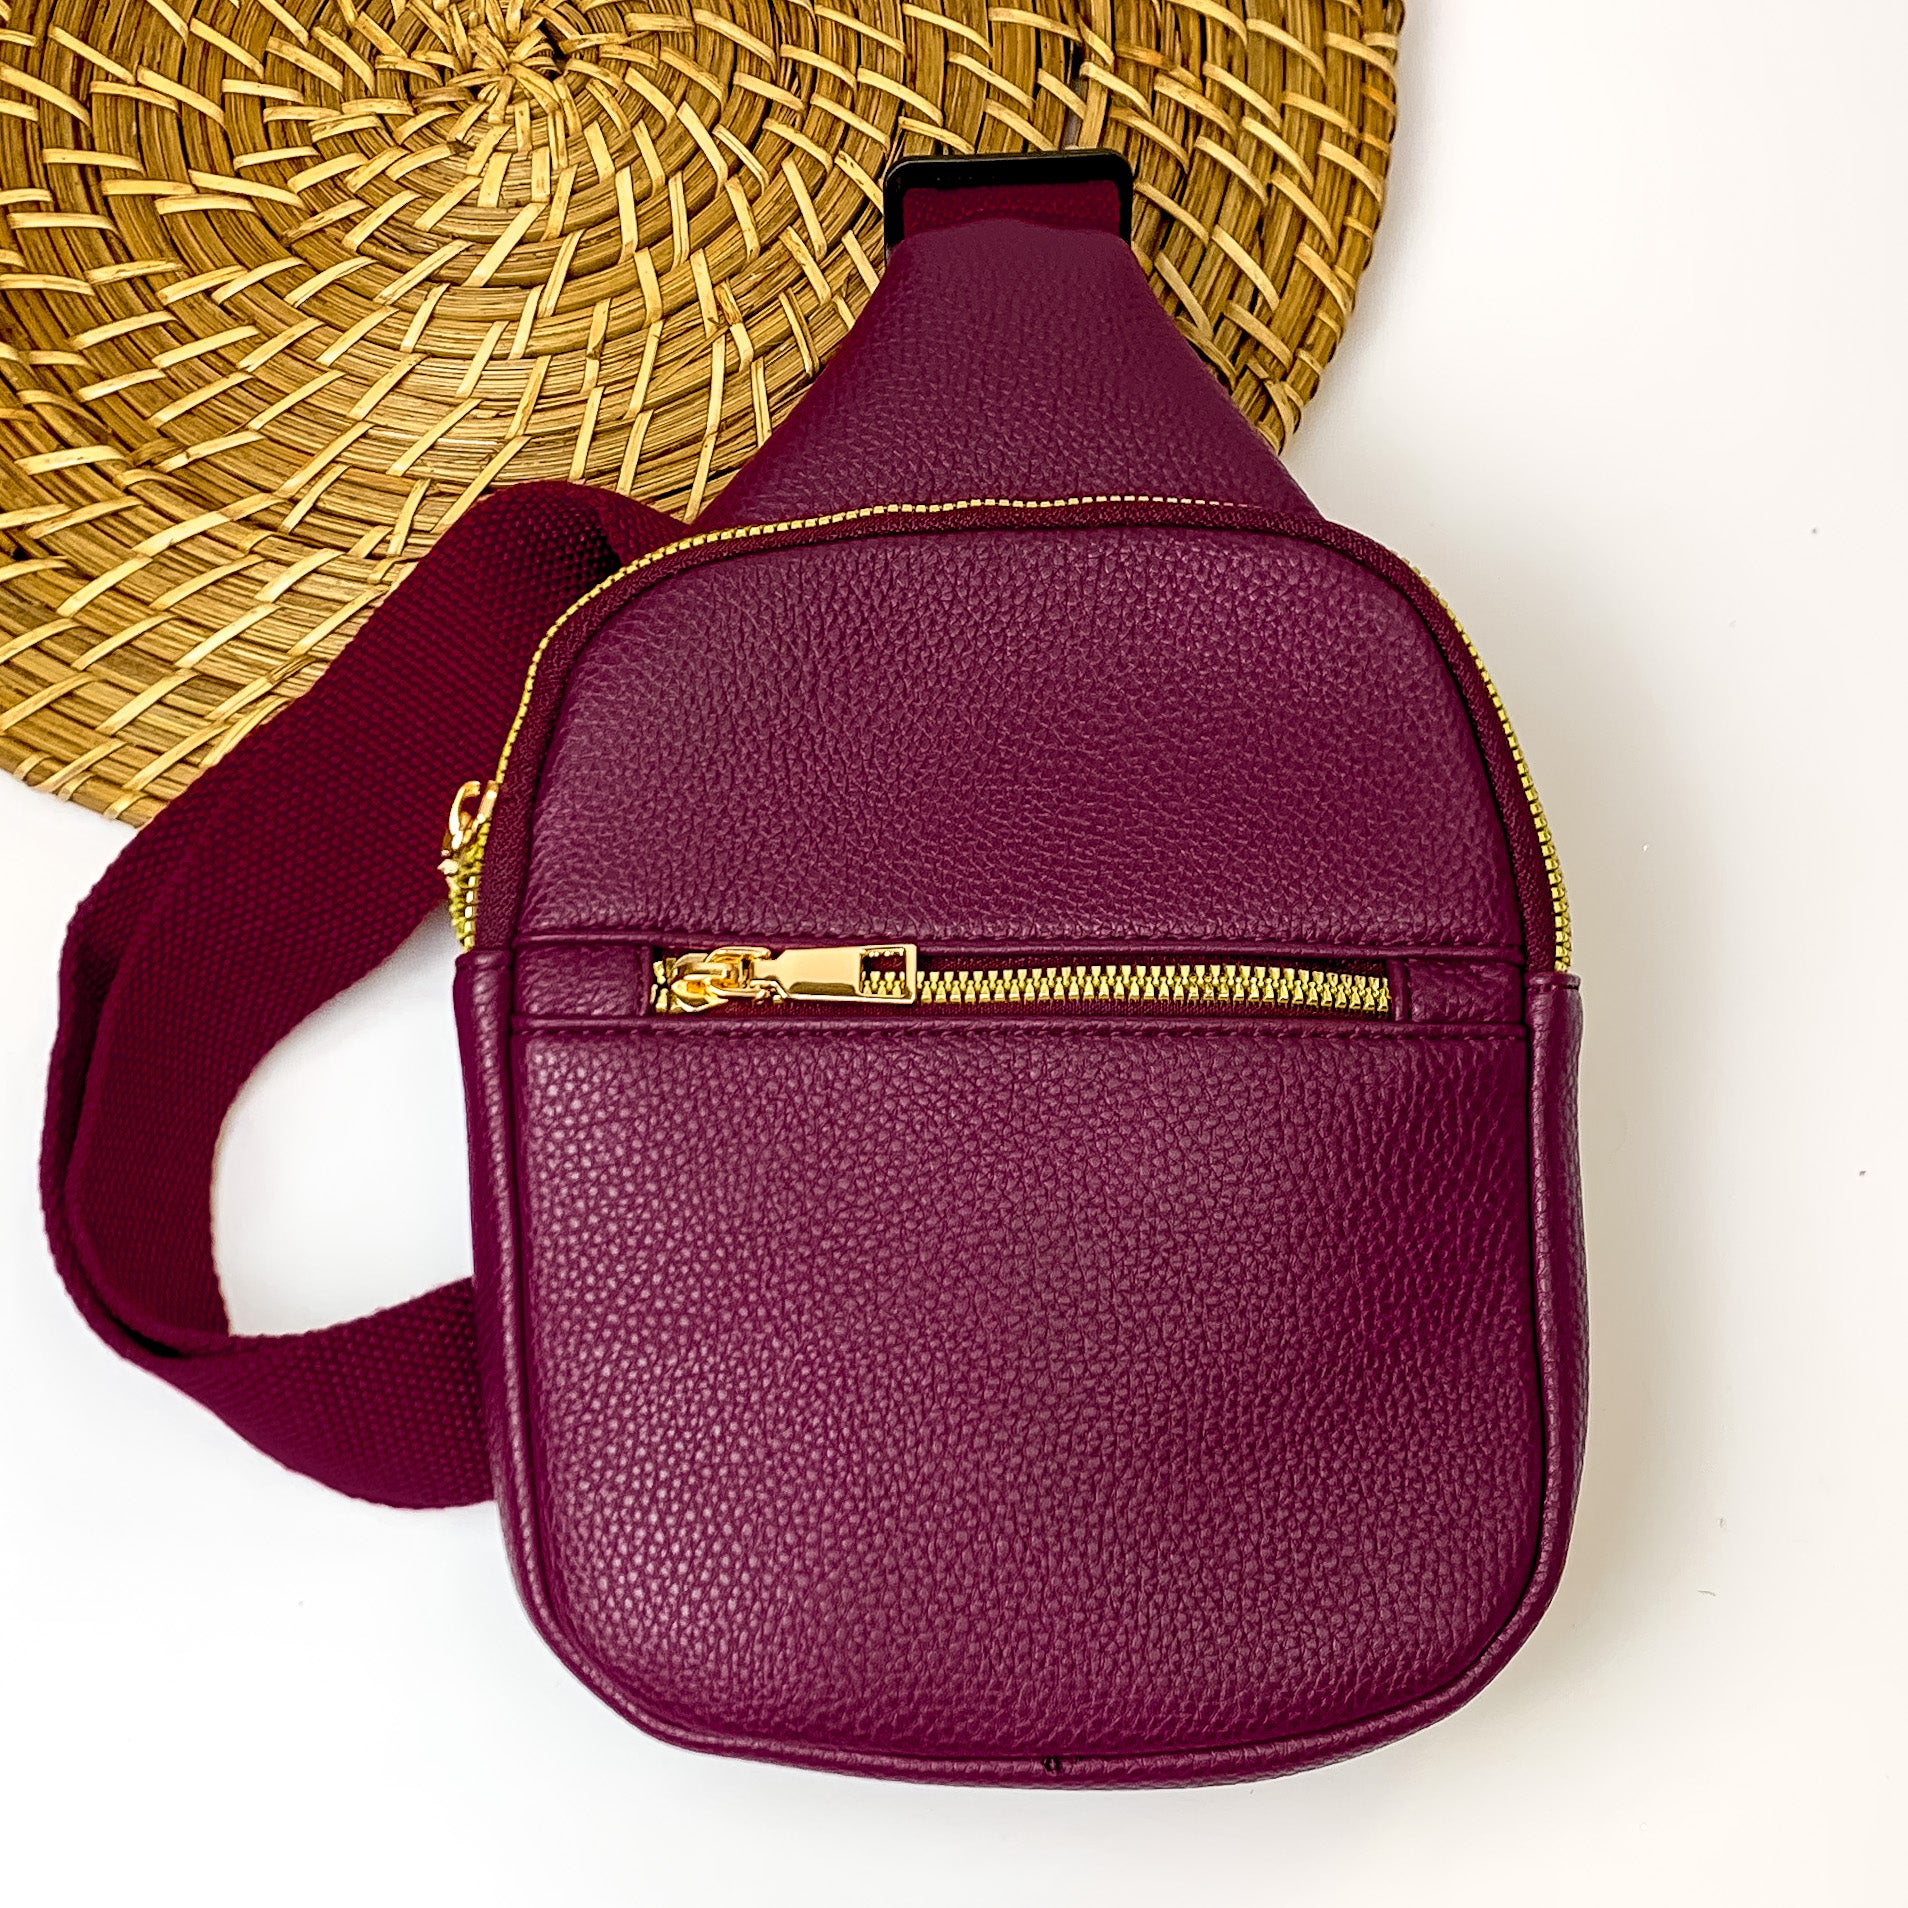 Sling Backpack in Wine Red - Giddy Up Glamour Boutique